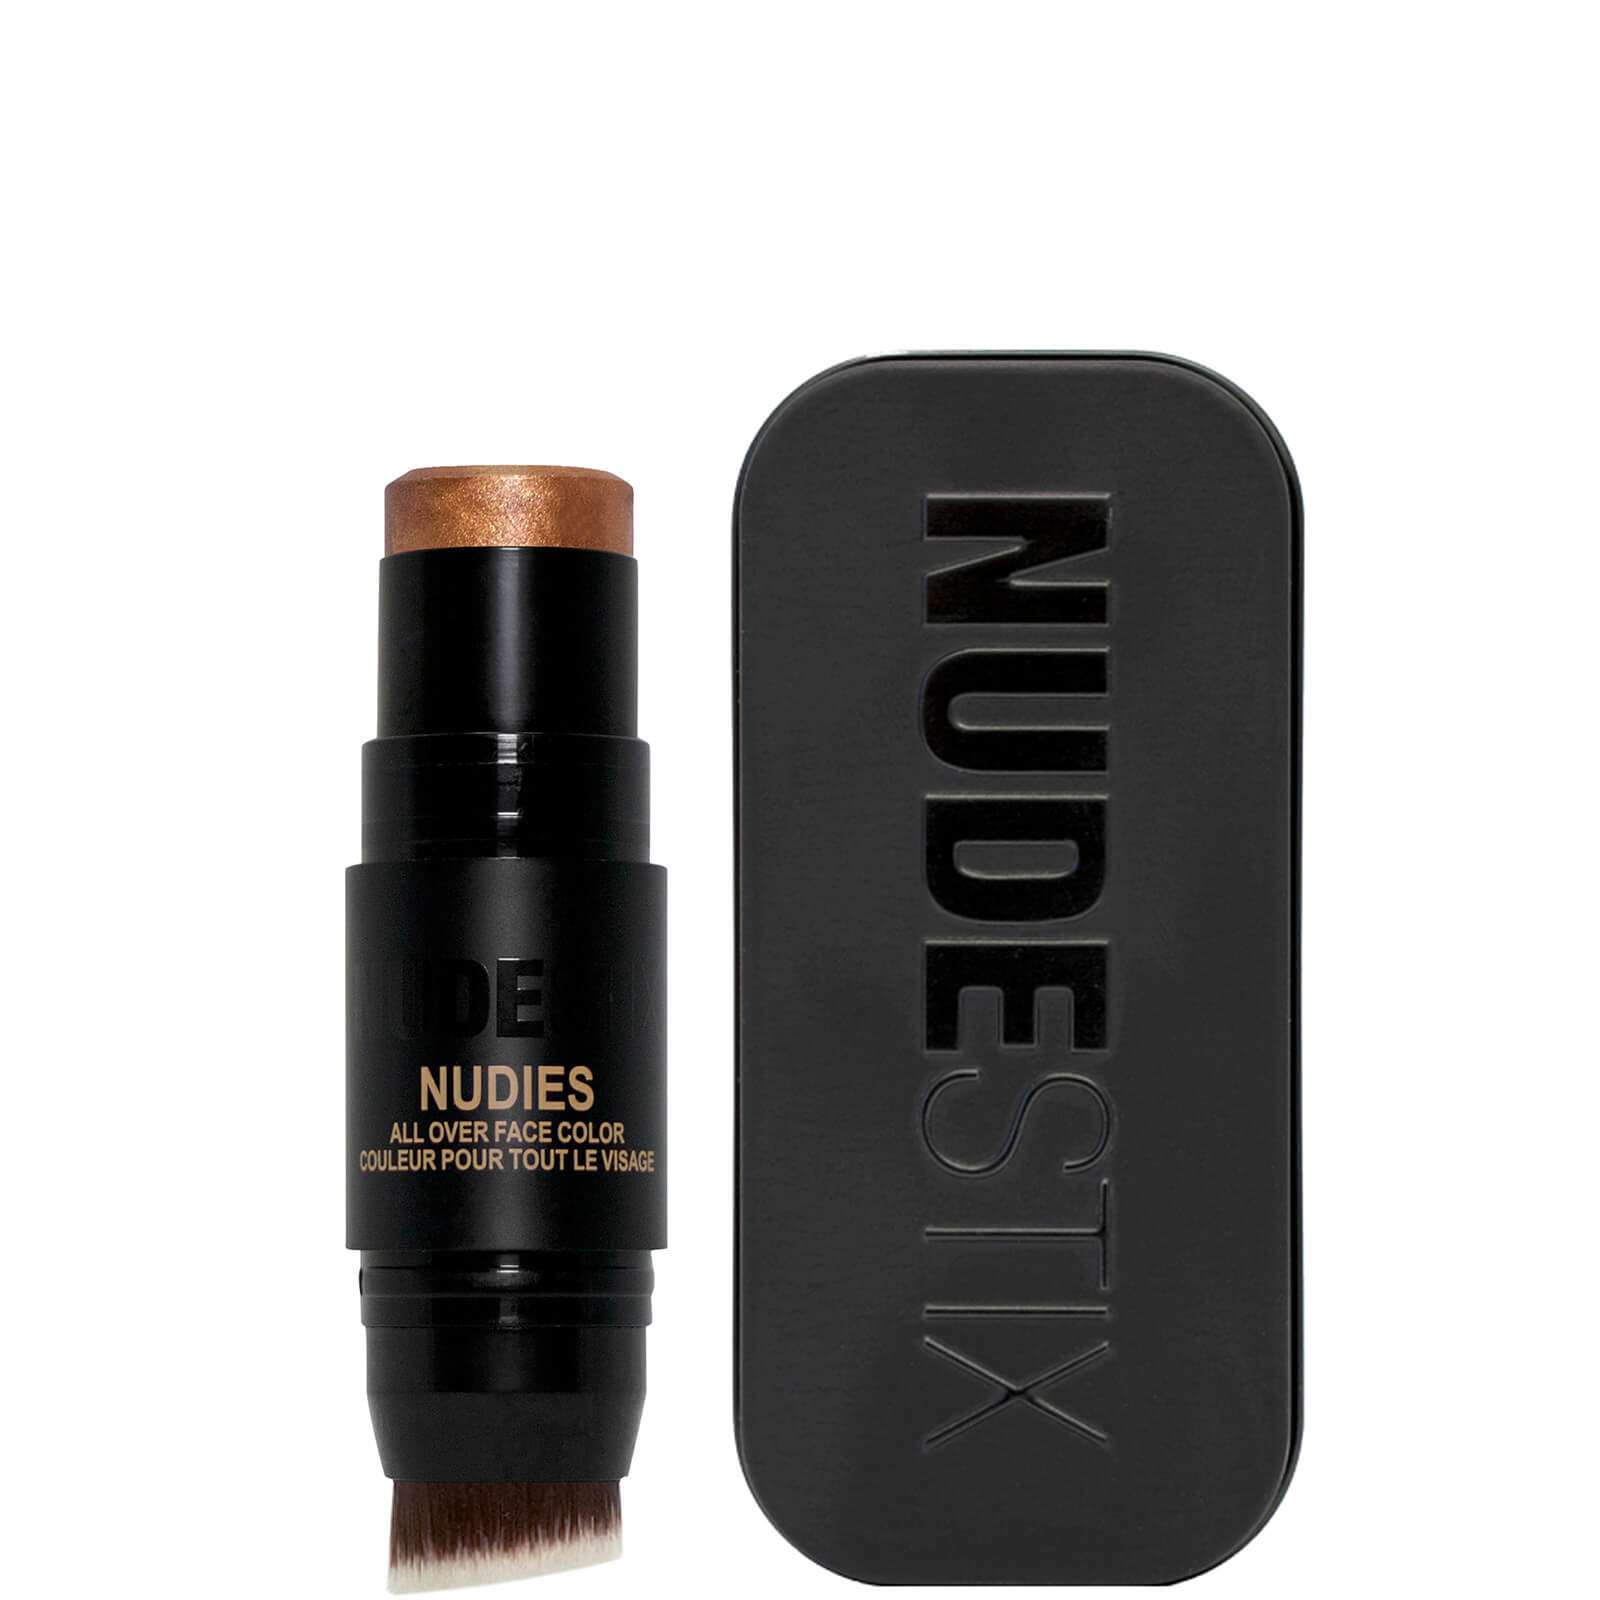 Nudestix Nudies All Over Face Color Glow Highlighter 8g (various Shades) In Brown Sugar, Baby